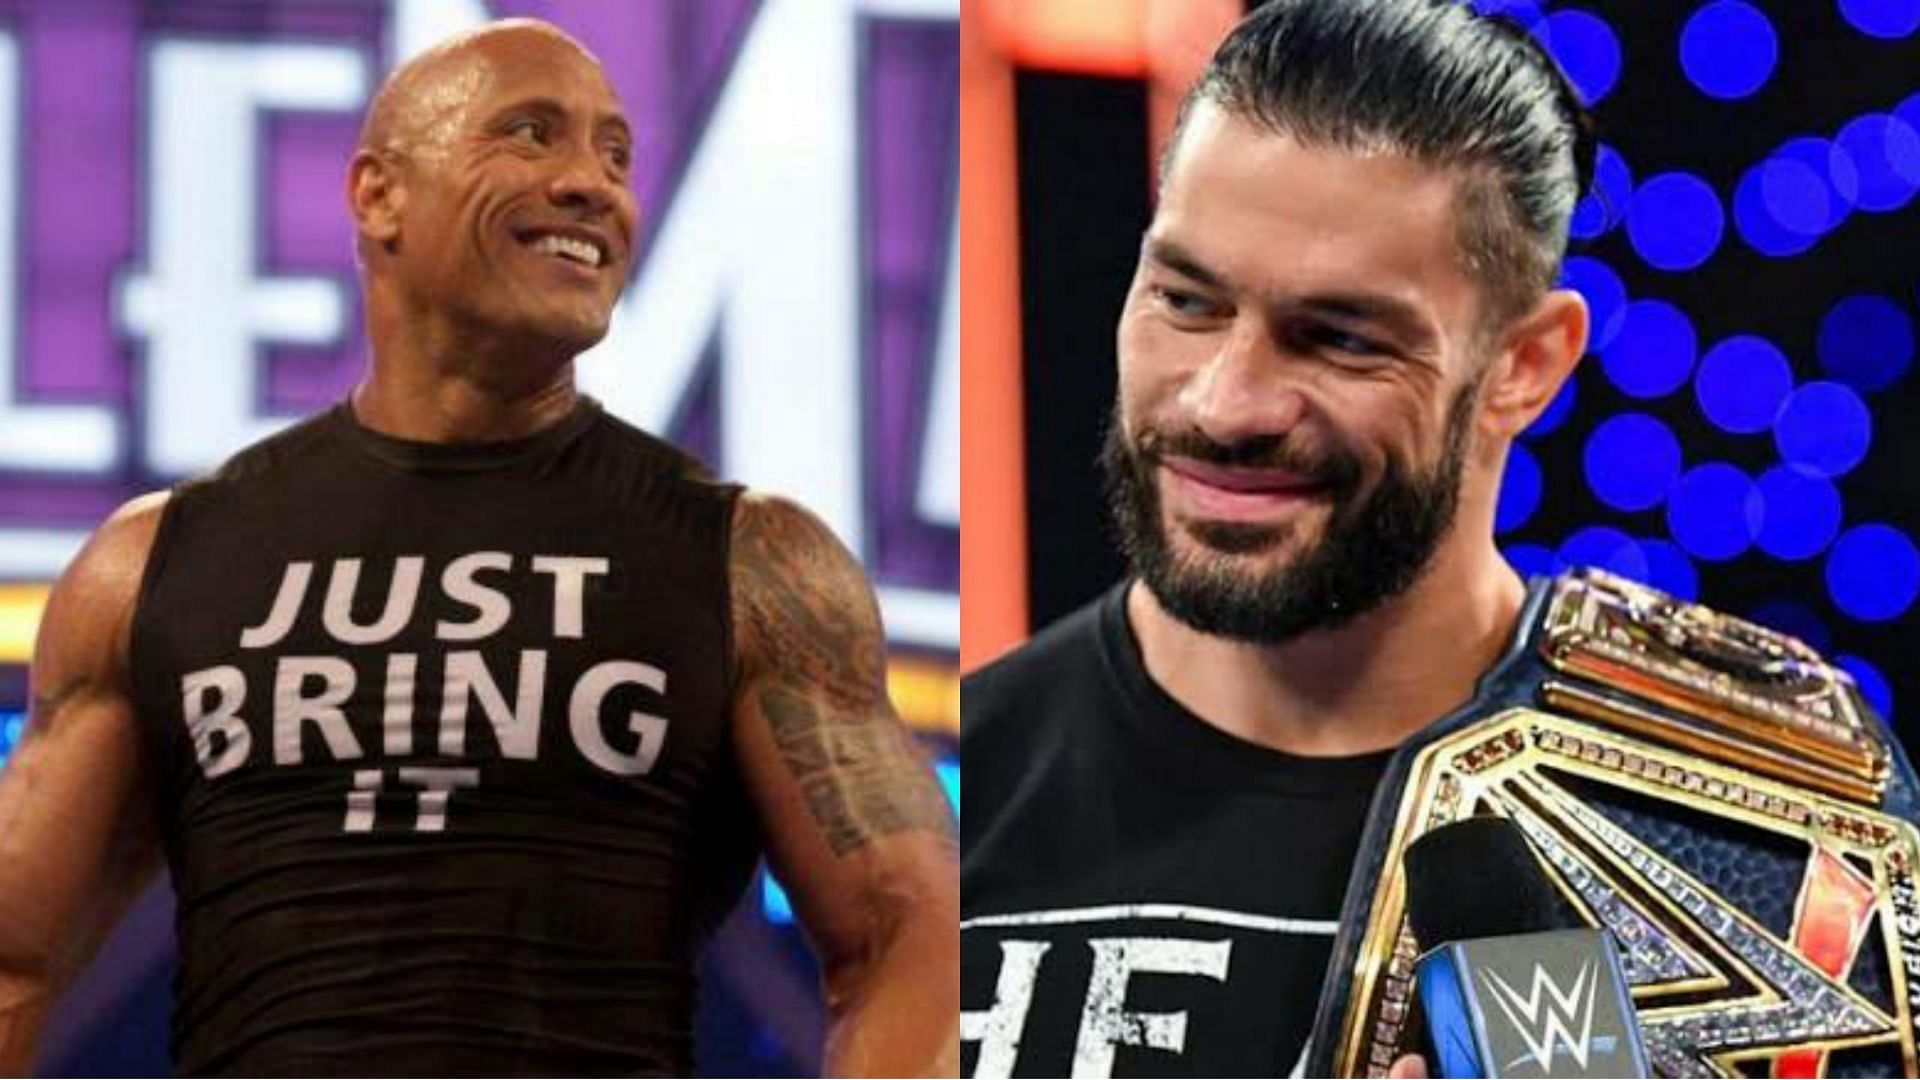 The Rock and Roman Reigns could face off in a WWE ring.